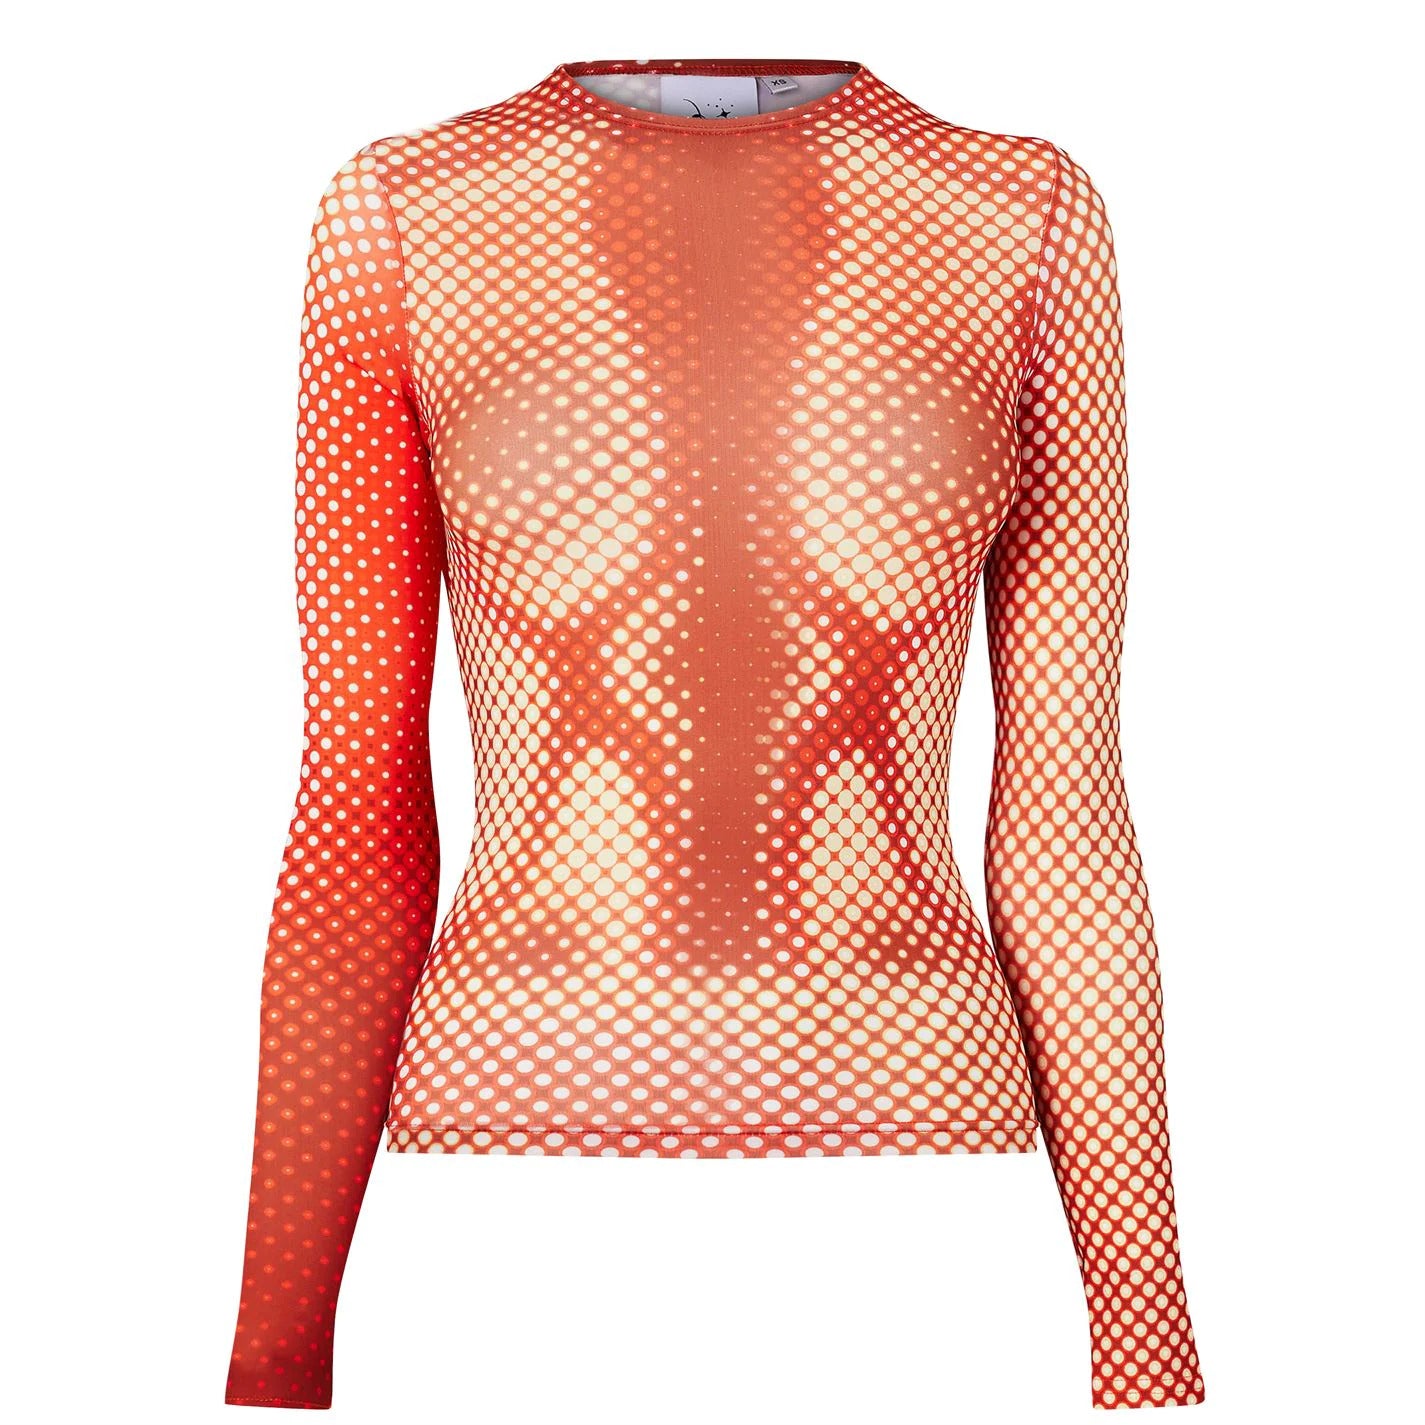 DIGITALLY PRINTED THERMOGRAPHIC LASER LONG SLEEVE FITTED TOP